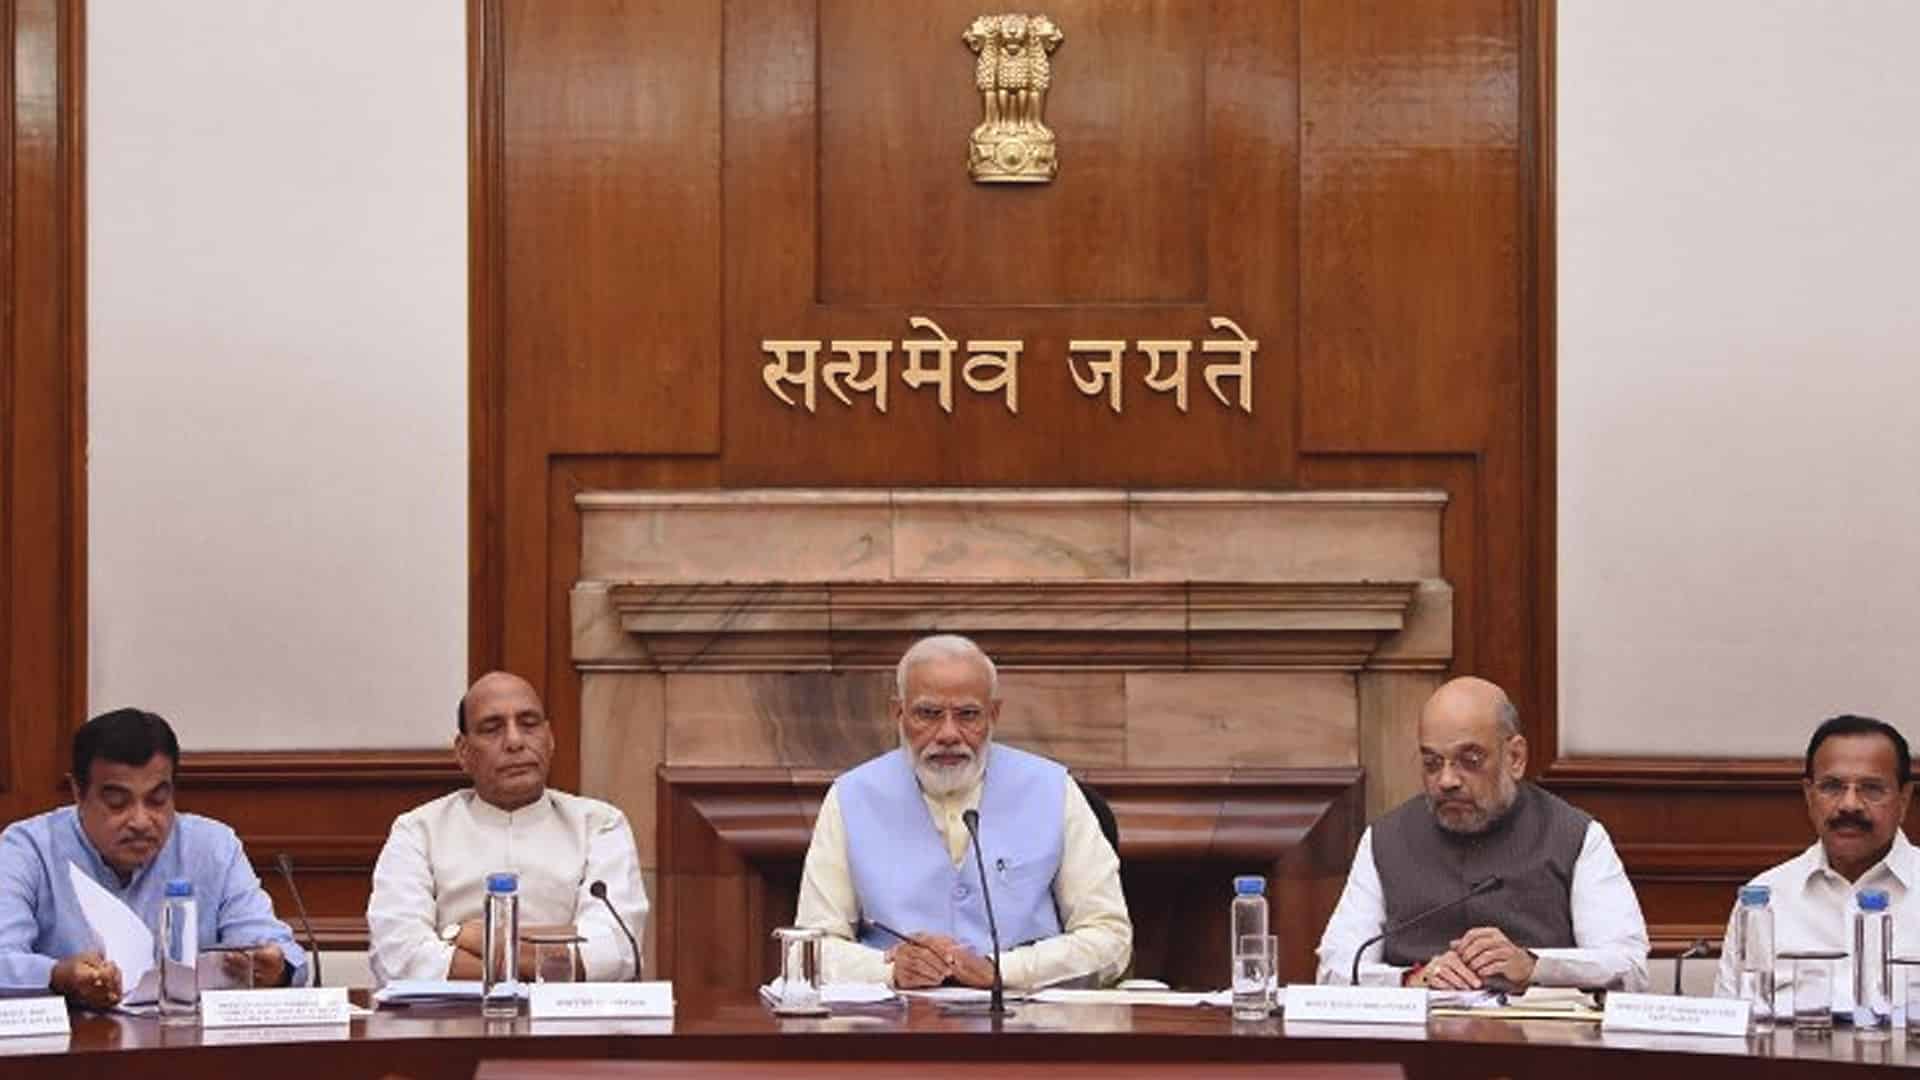 Cabinet approves a bill to decriminalise minor offences to promote ease of doing business